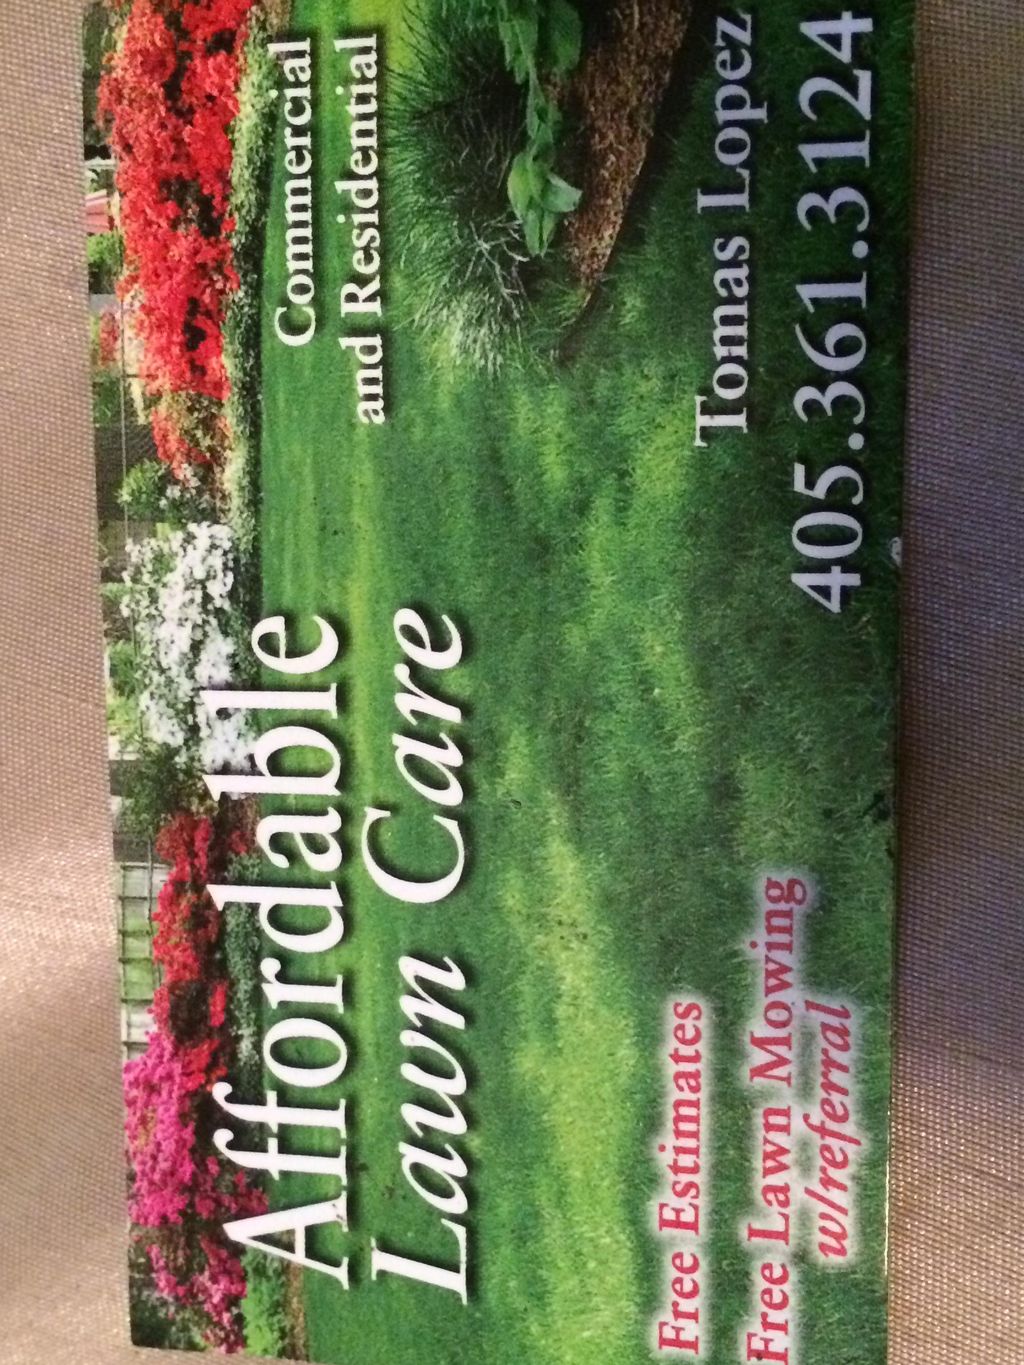 Affordable lawn care and landscaping